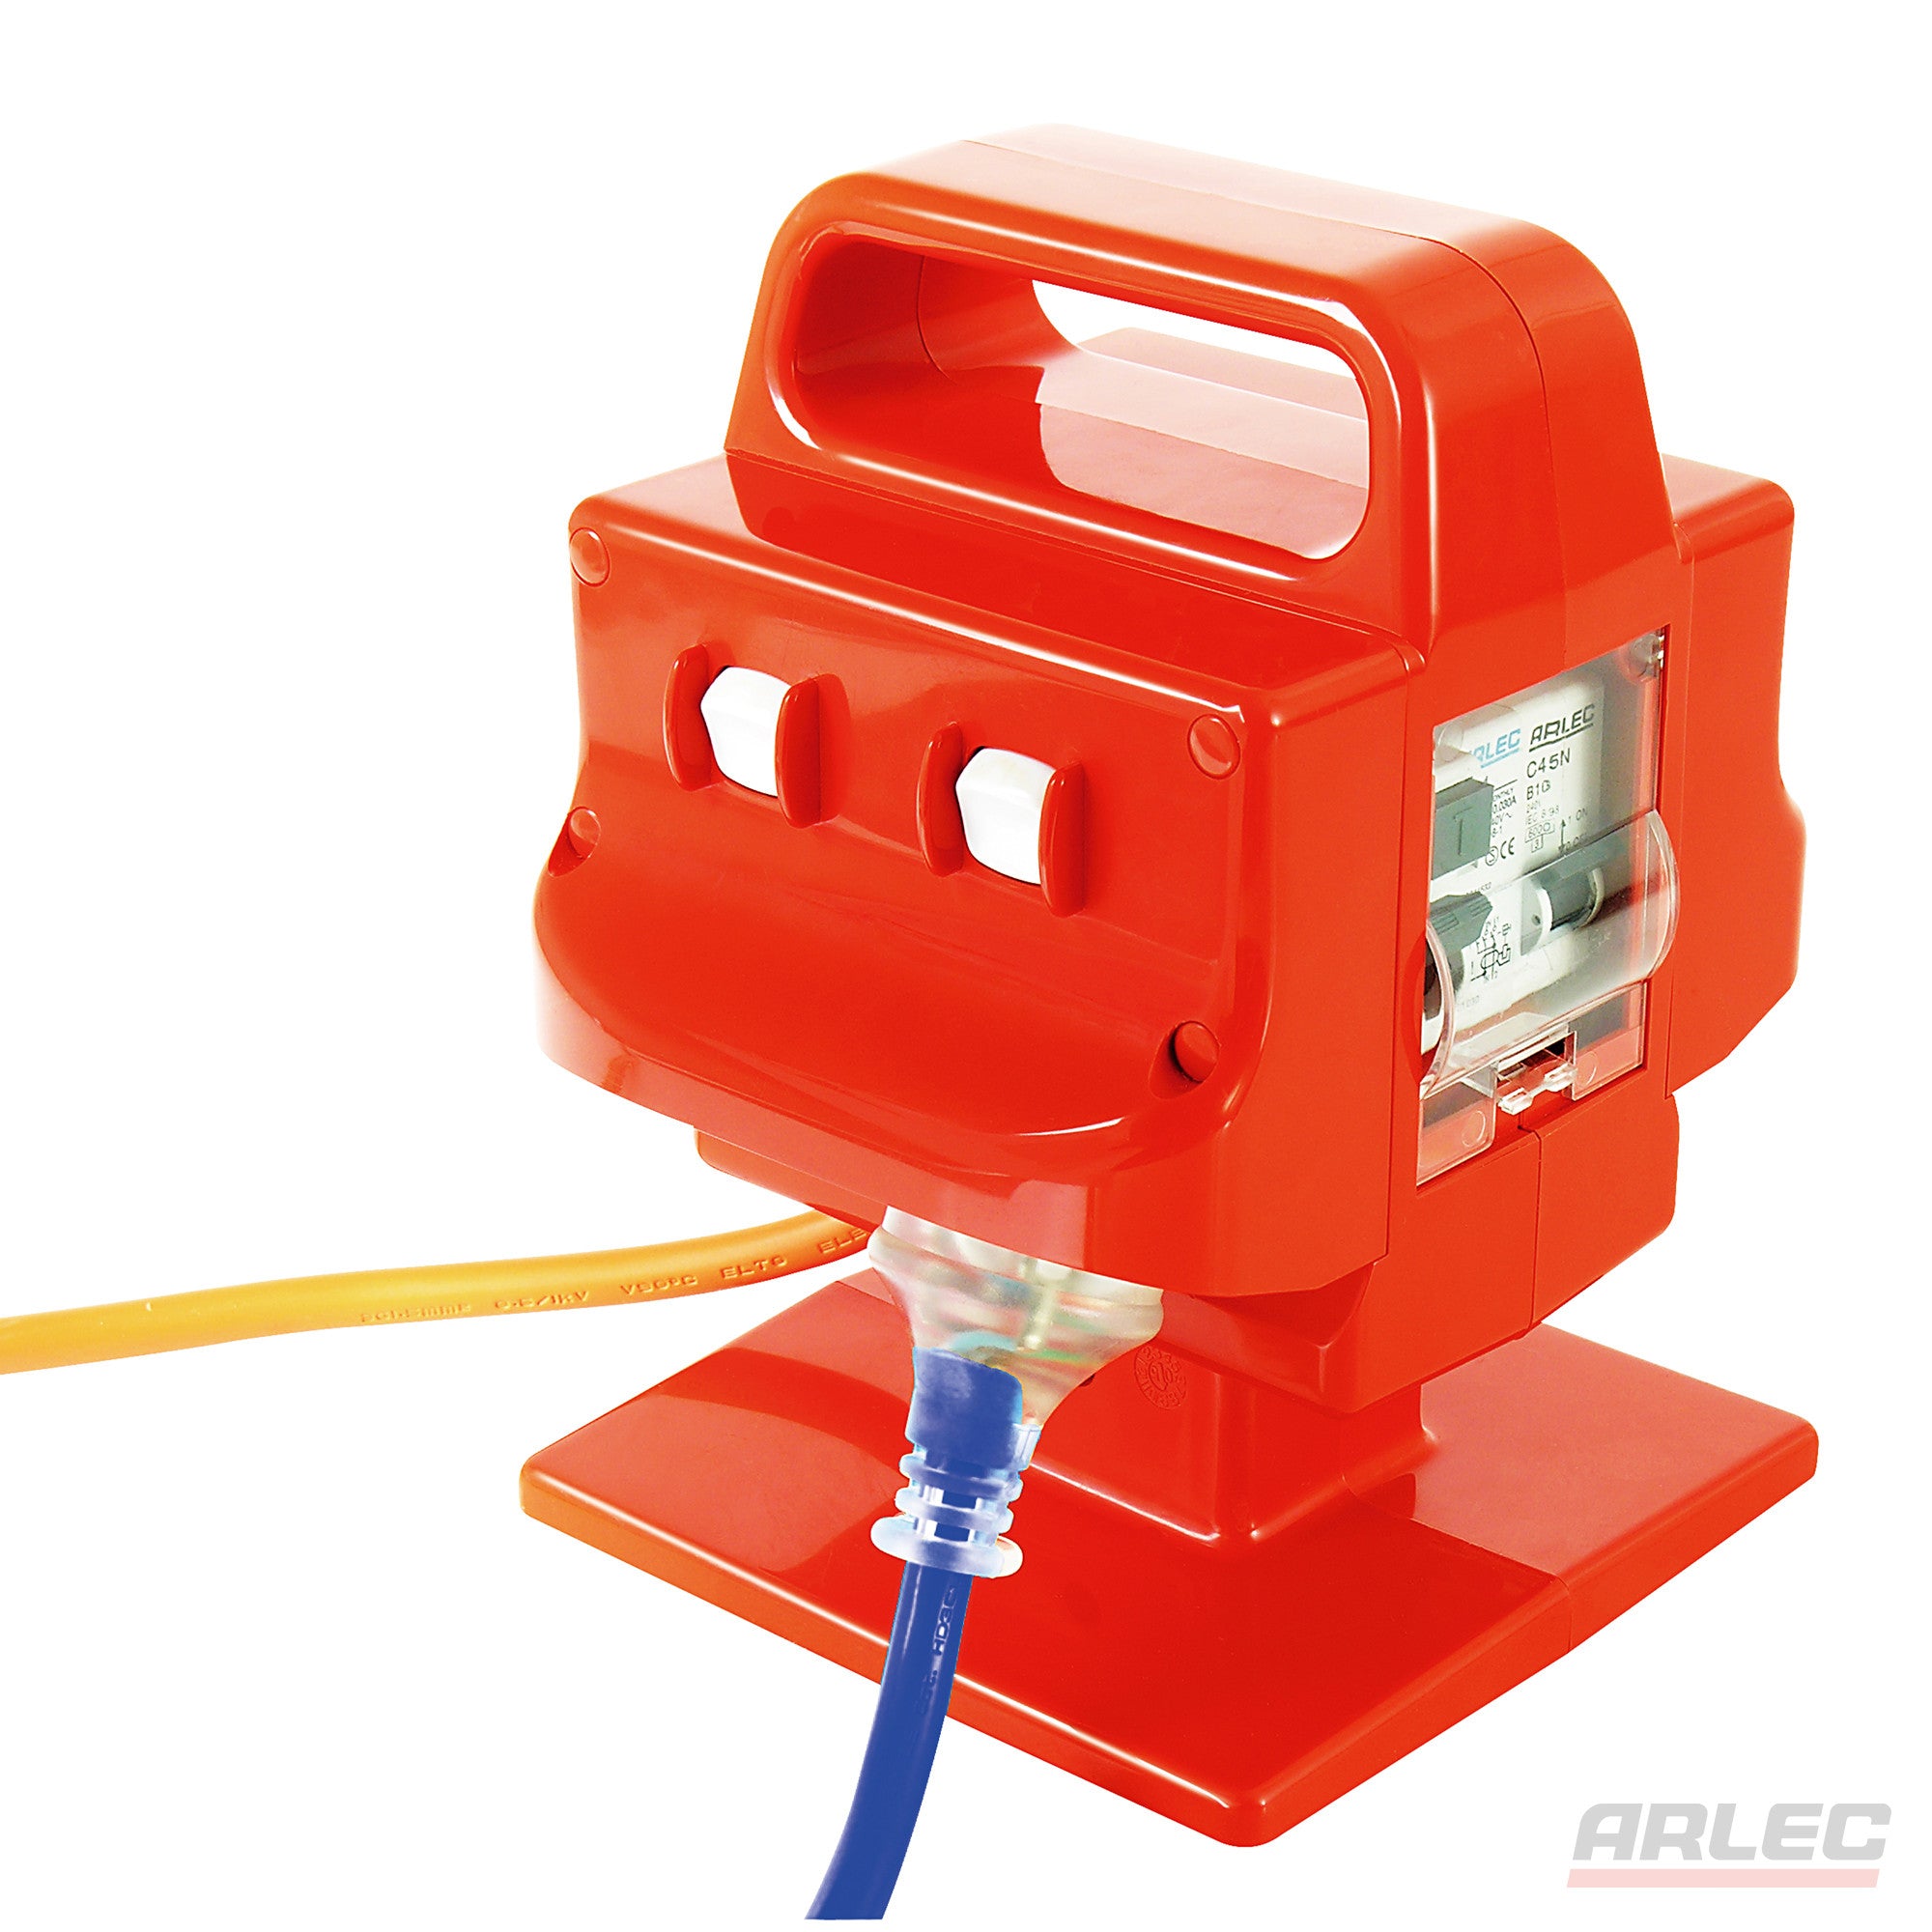 Arlec ARLEC Heavy Duty Portable 4 Outlet 15 Amp Safety Switch - PB97 - BNR Industrial